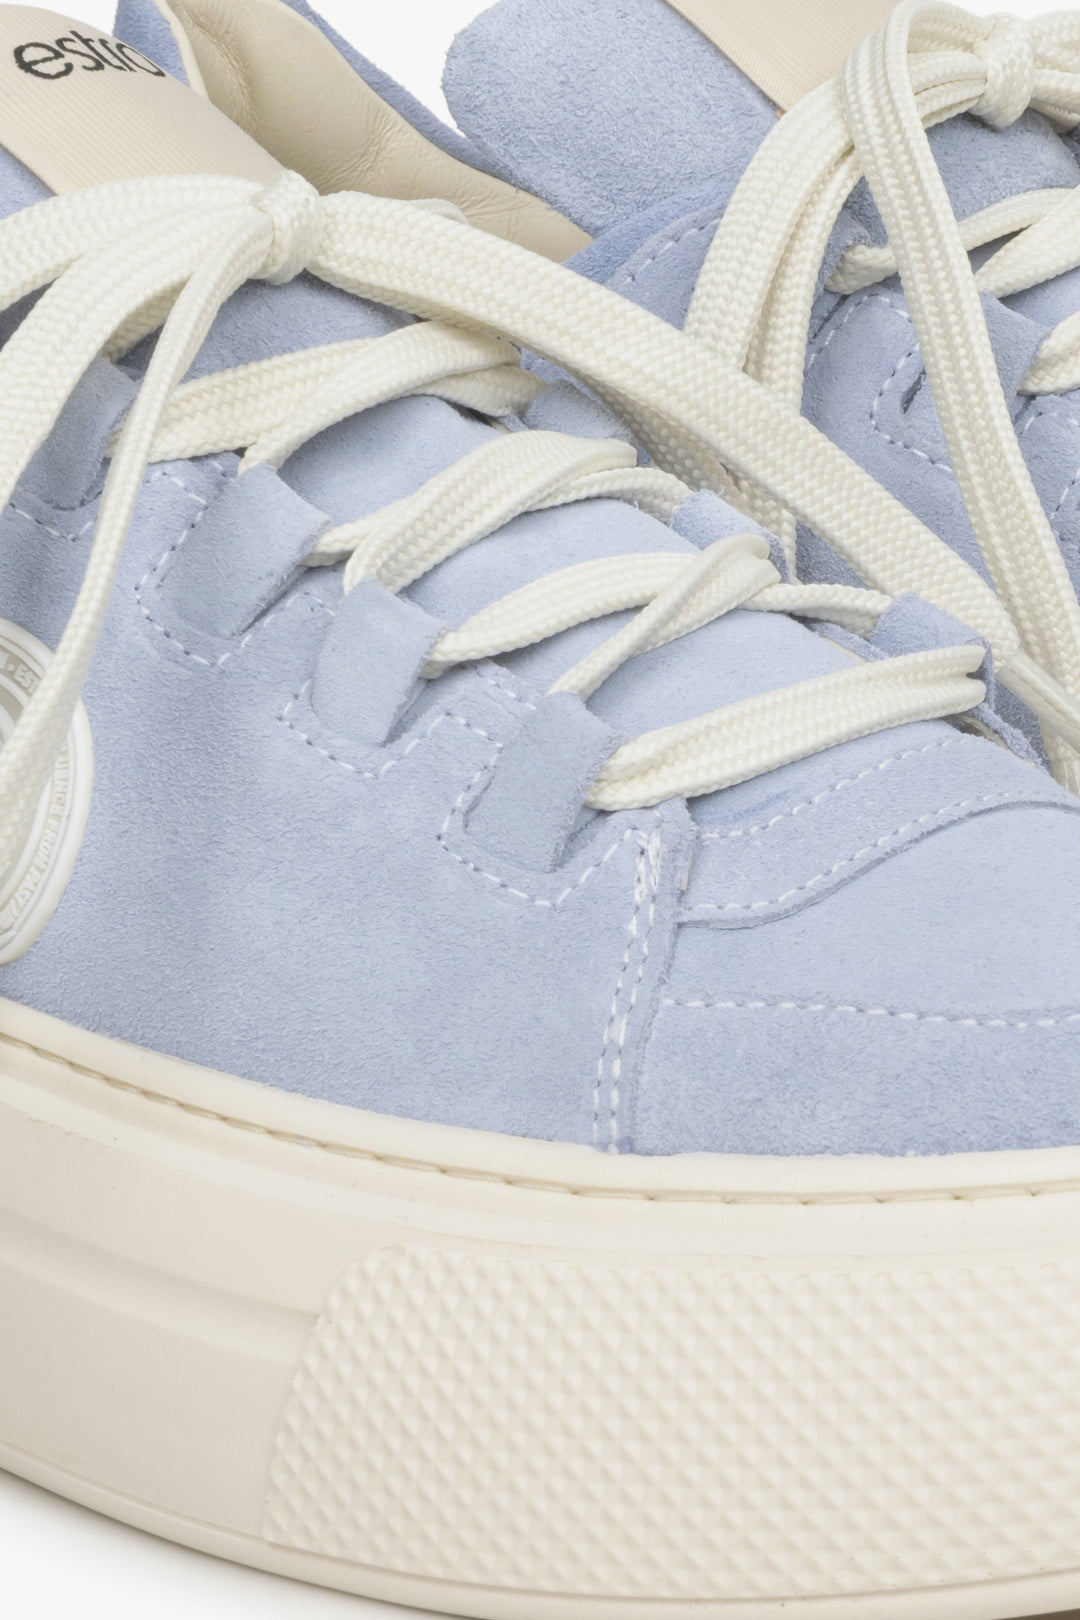 Women's blue sneakers made of genuine leather - close-up on details.